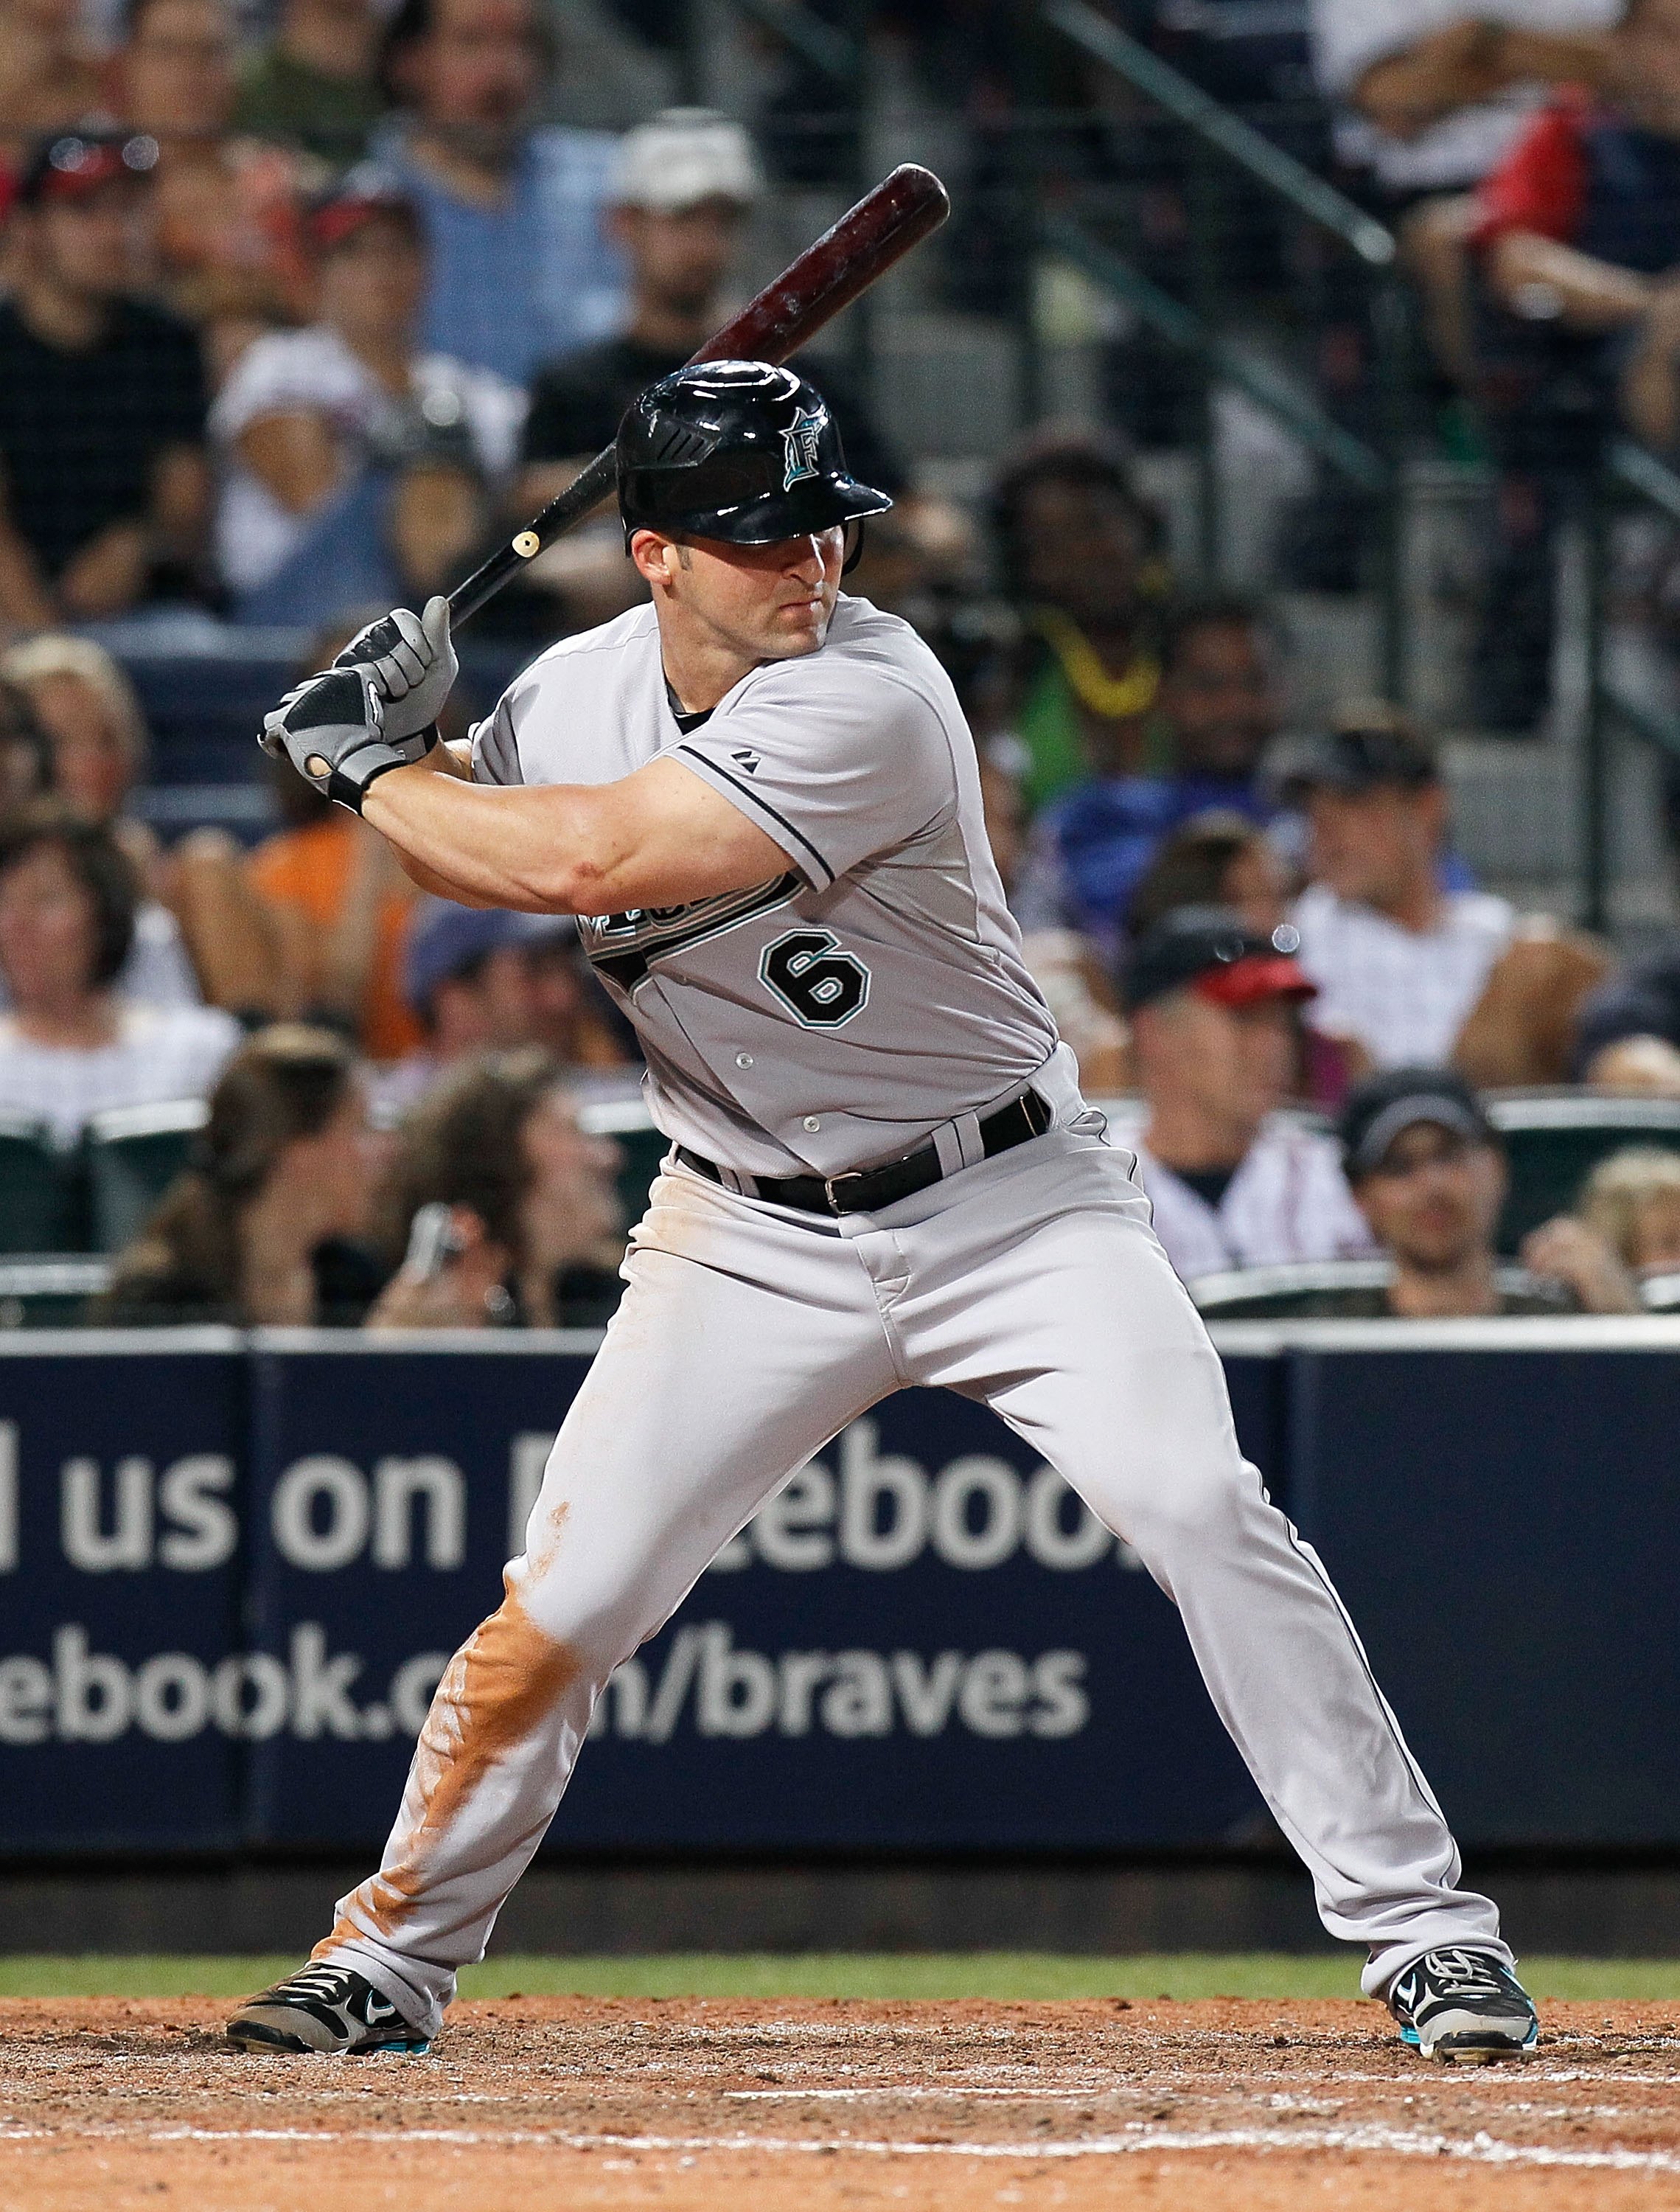 Dan Uggla Is Traded From the Marlins to the Braves - The New York